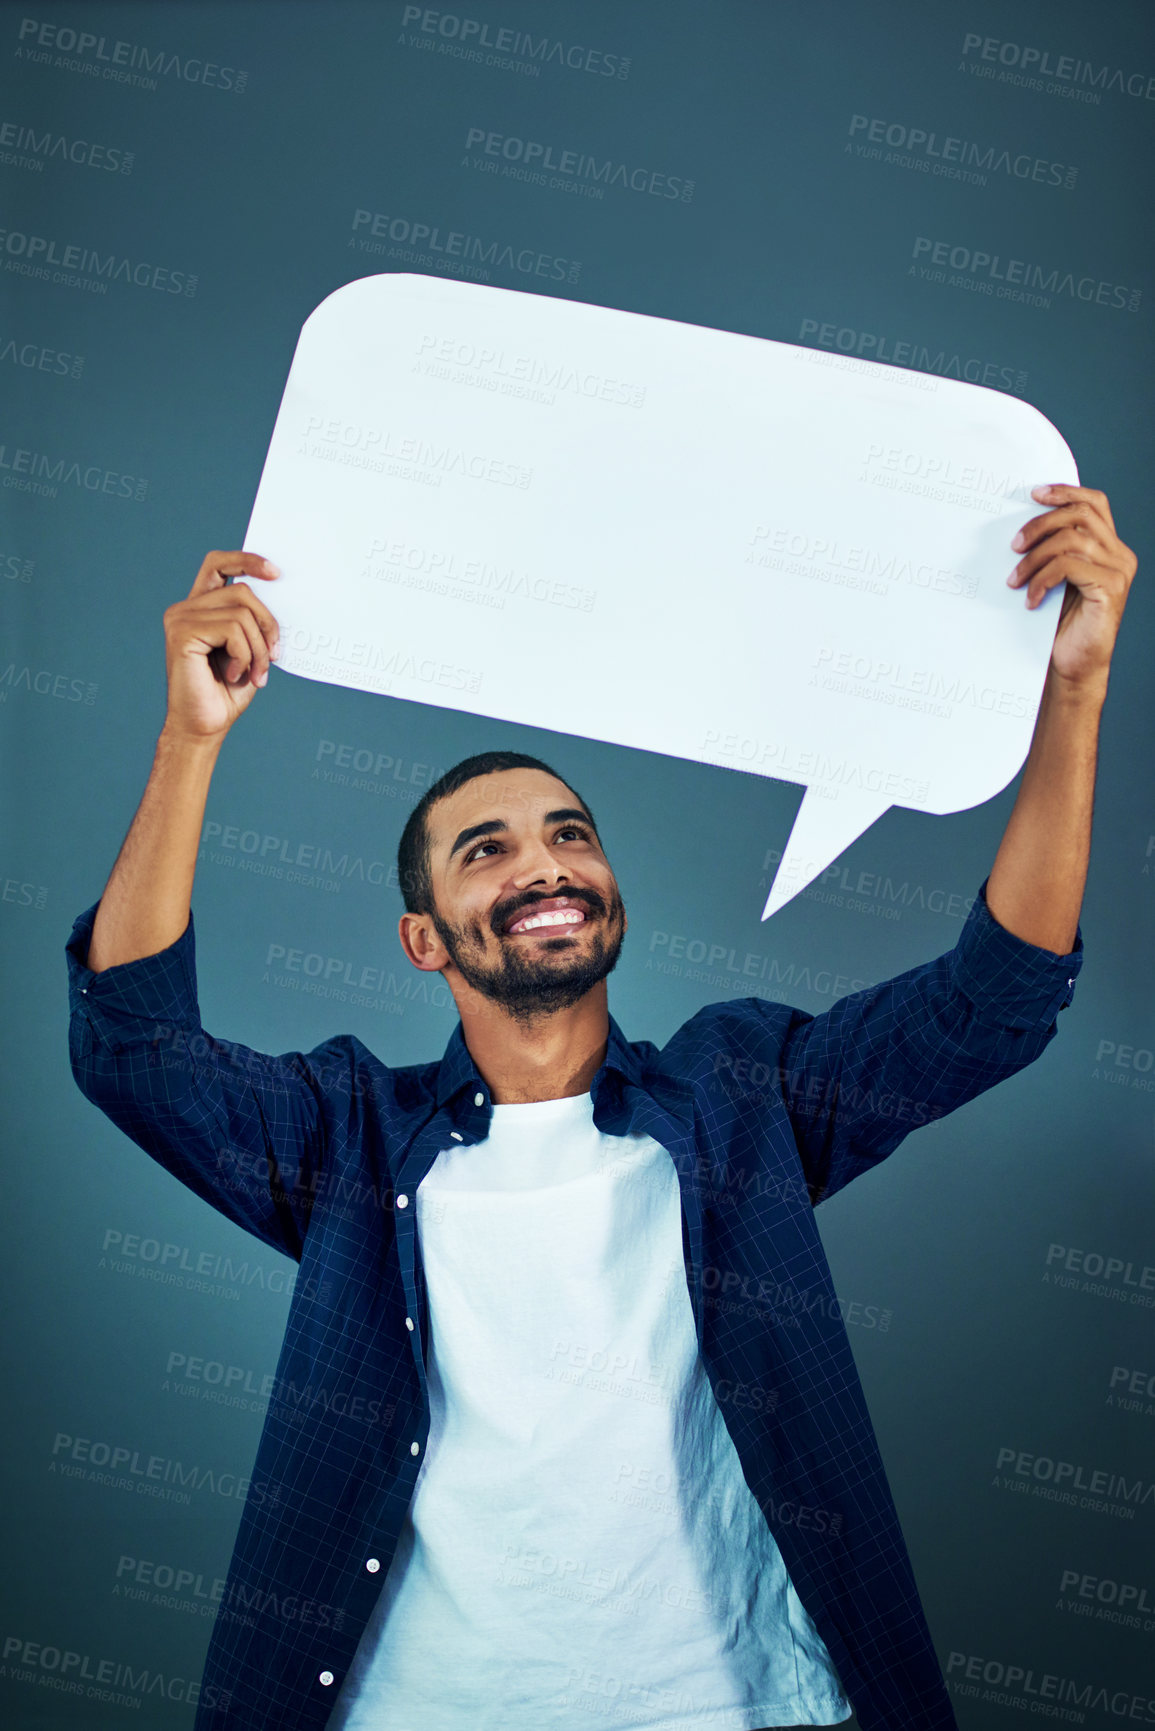 Buy stock photo Studio shot of a man holding a speech bubble against a gray background